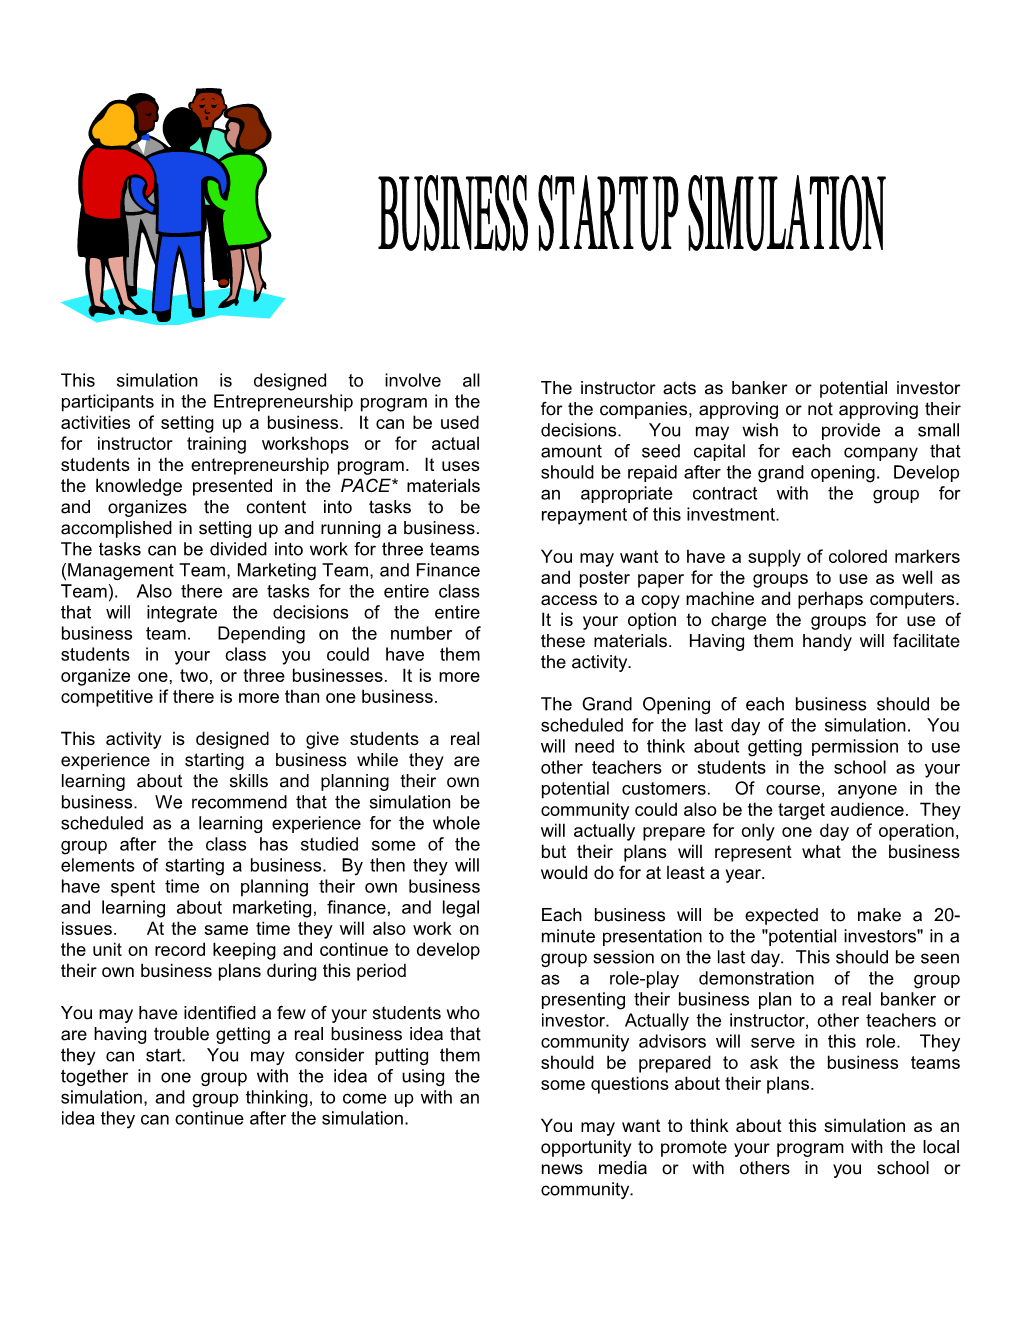 This Simulation Is Designed to Involve All Participants in the Entrepreneurship Program